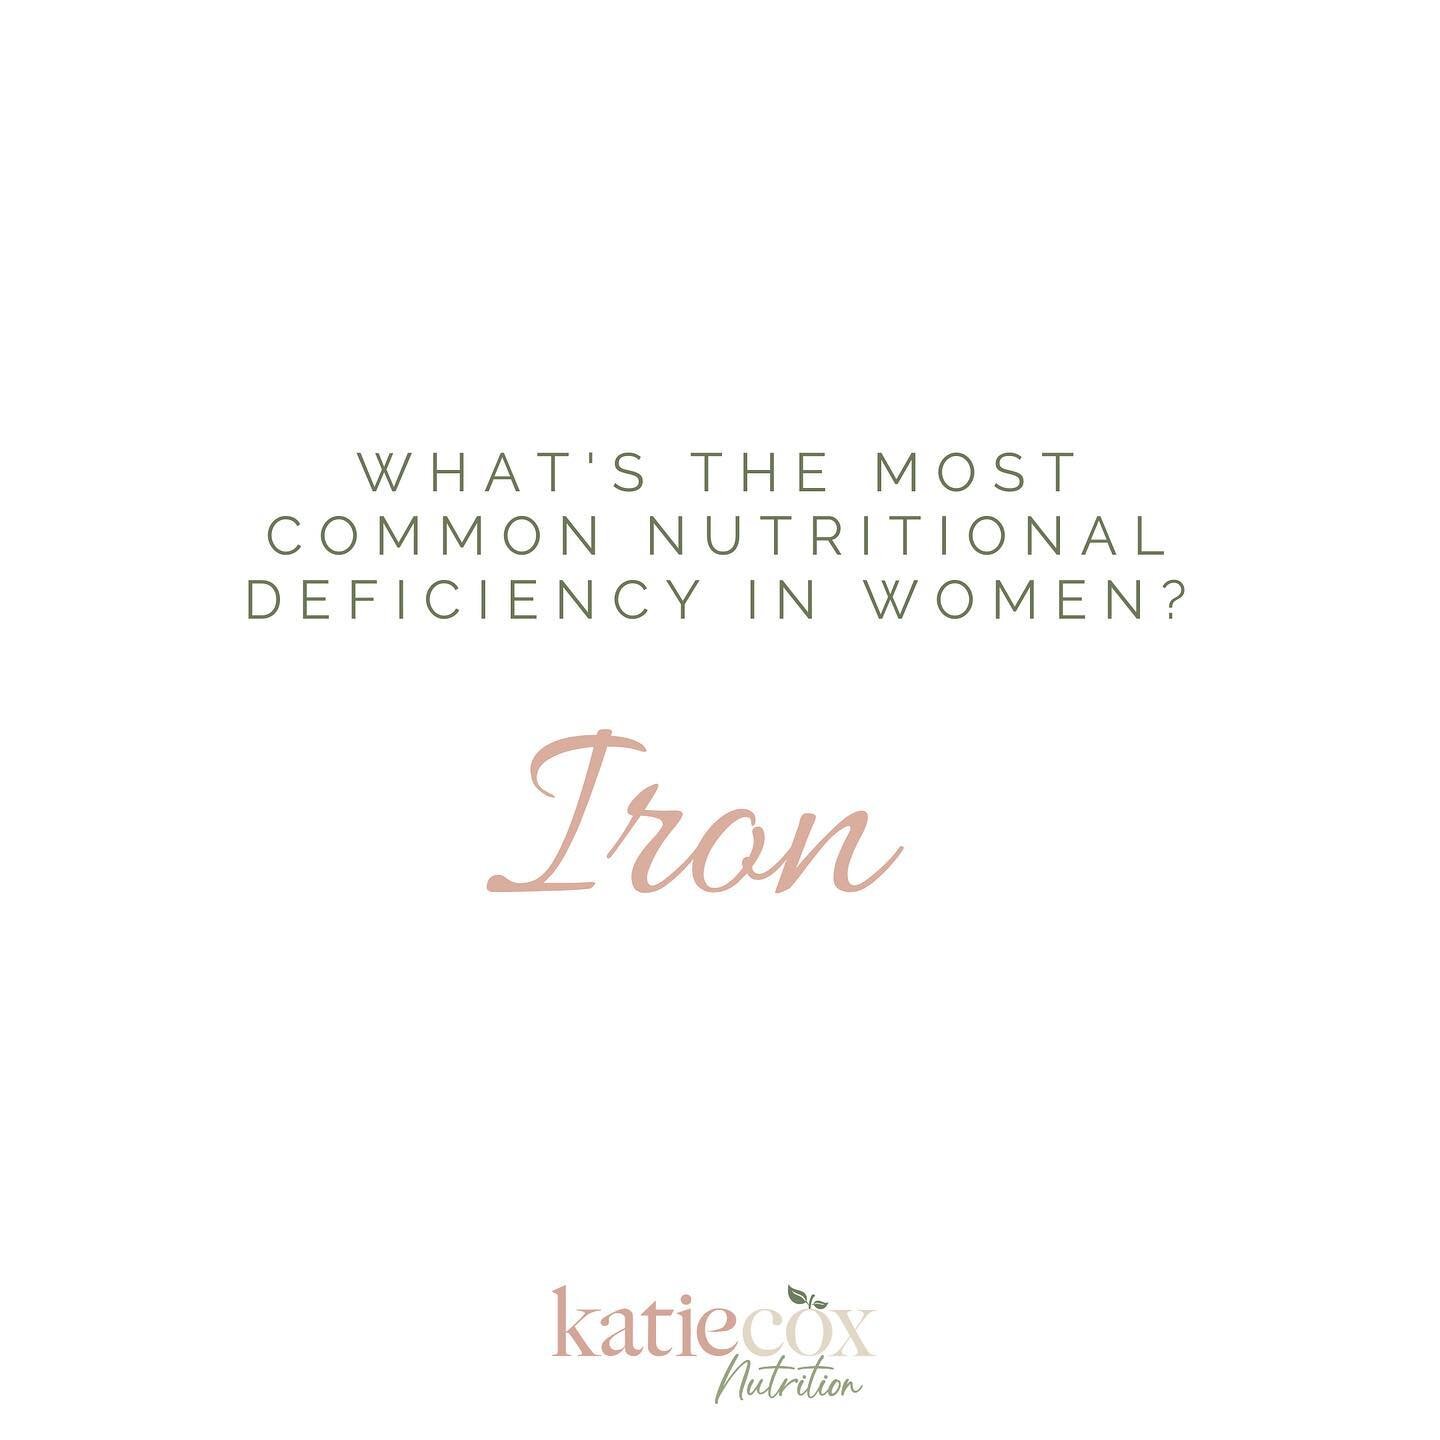 Iron deficiency: the most common nutritional deficiency in menstruating women. Fatigue is a well known symptom, but others might surprise you (hello, heavy periods?).

Increased requirements, insufficient intake, poor absorption or increased blood lo